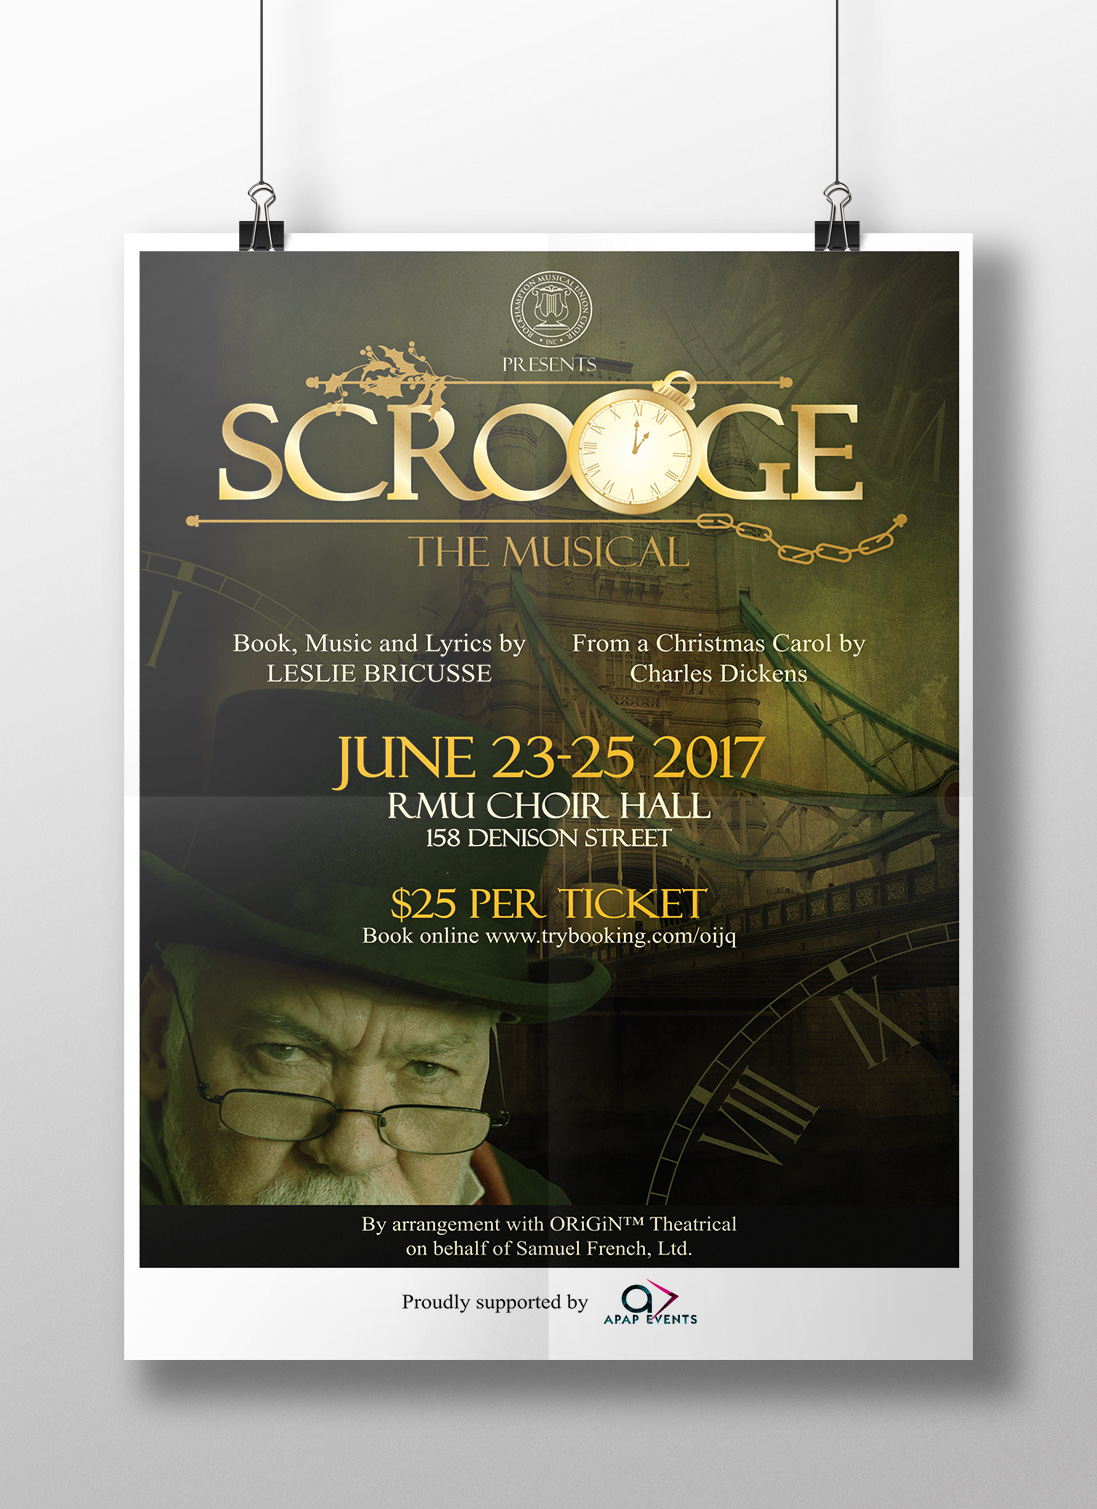 APAP Events Event Management and Graphic Design Rockhampton Scrooge The Musical Poster and Logo design